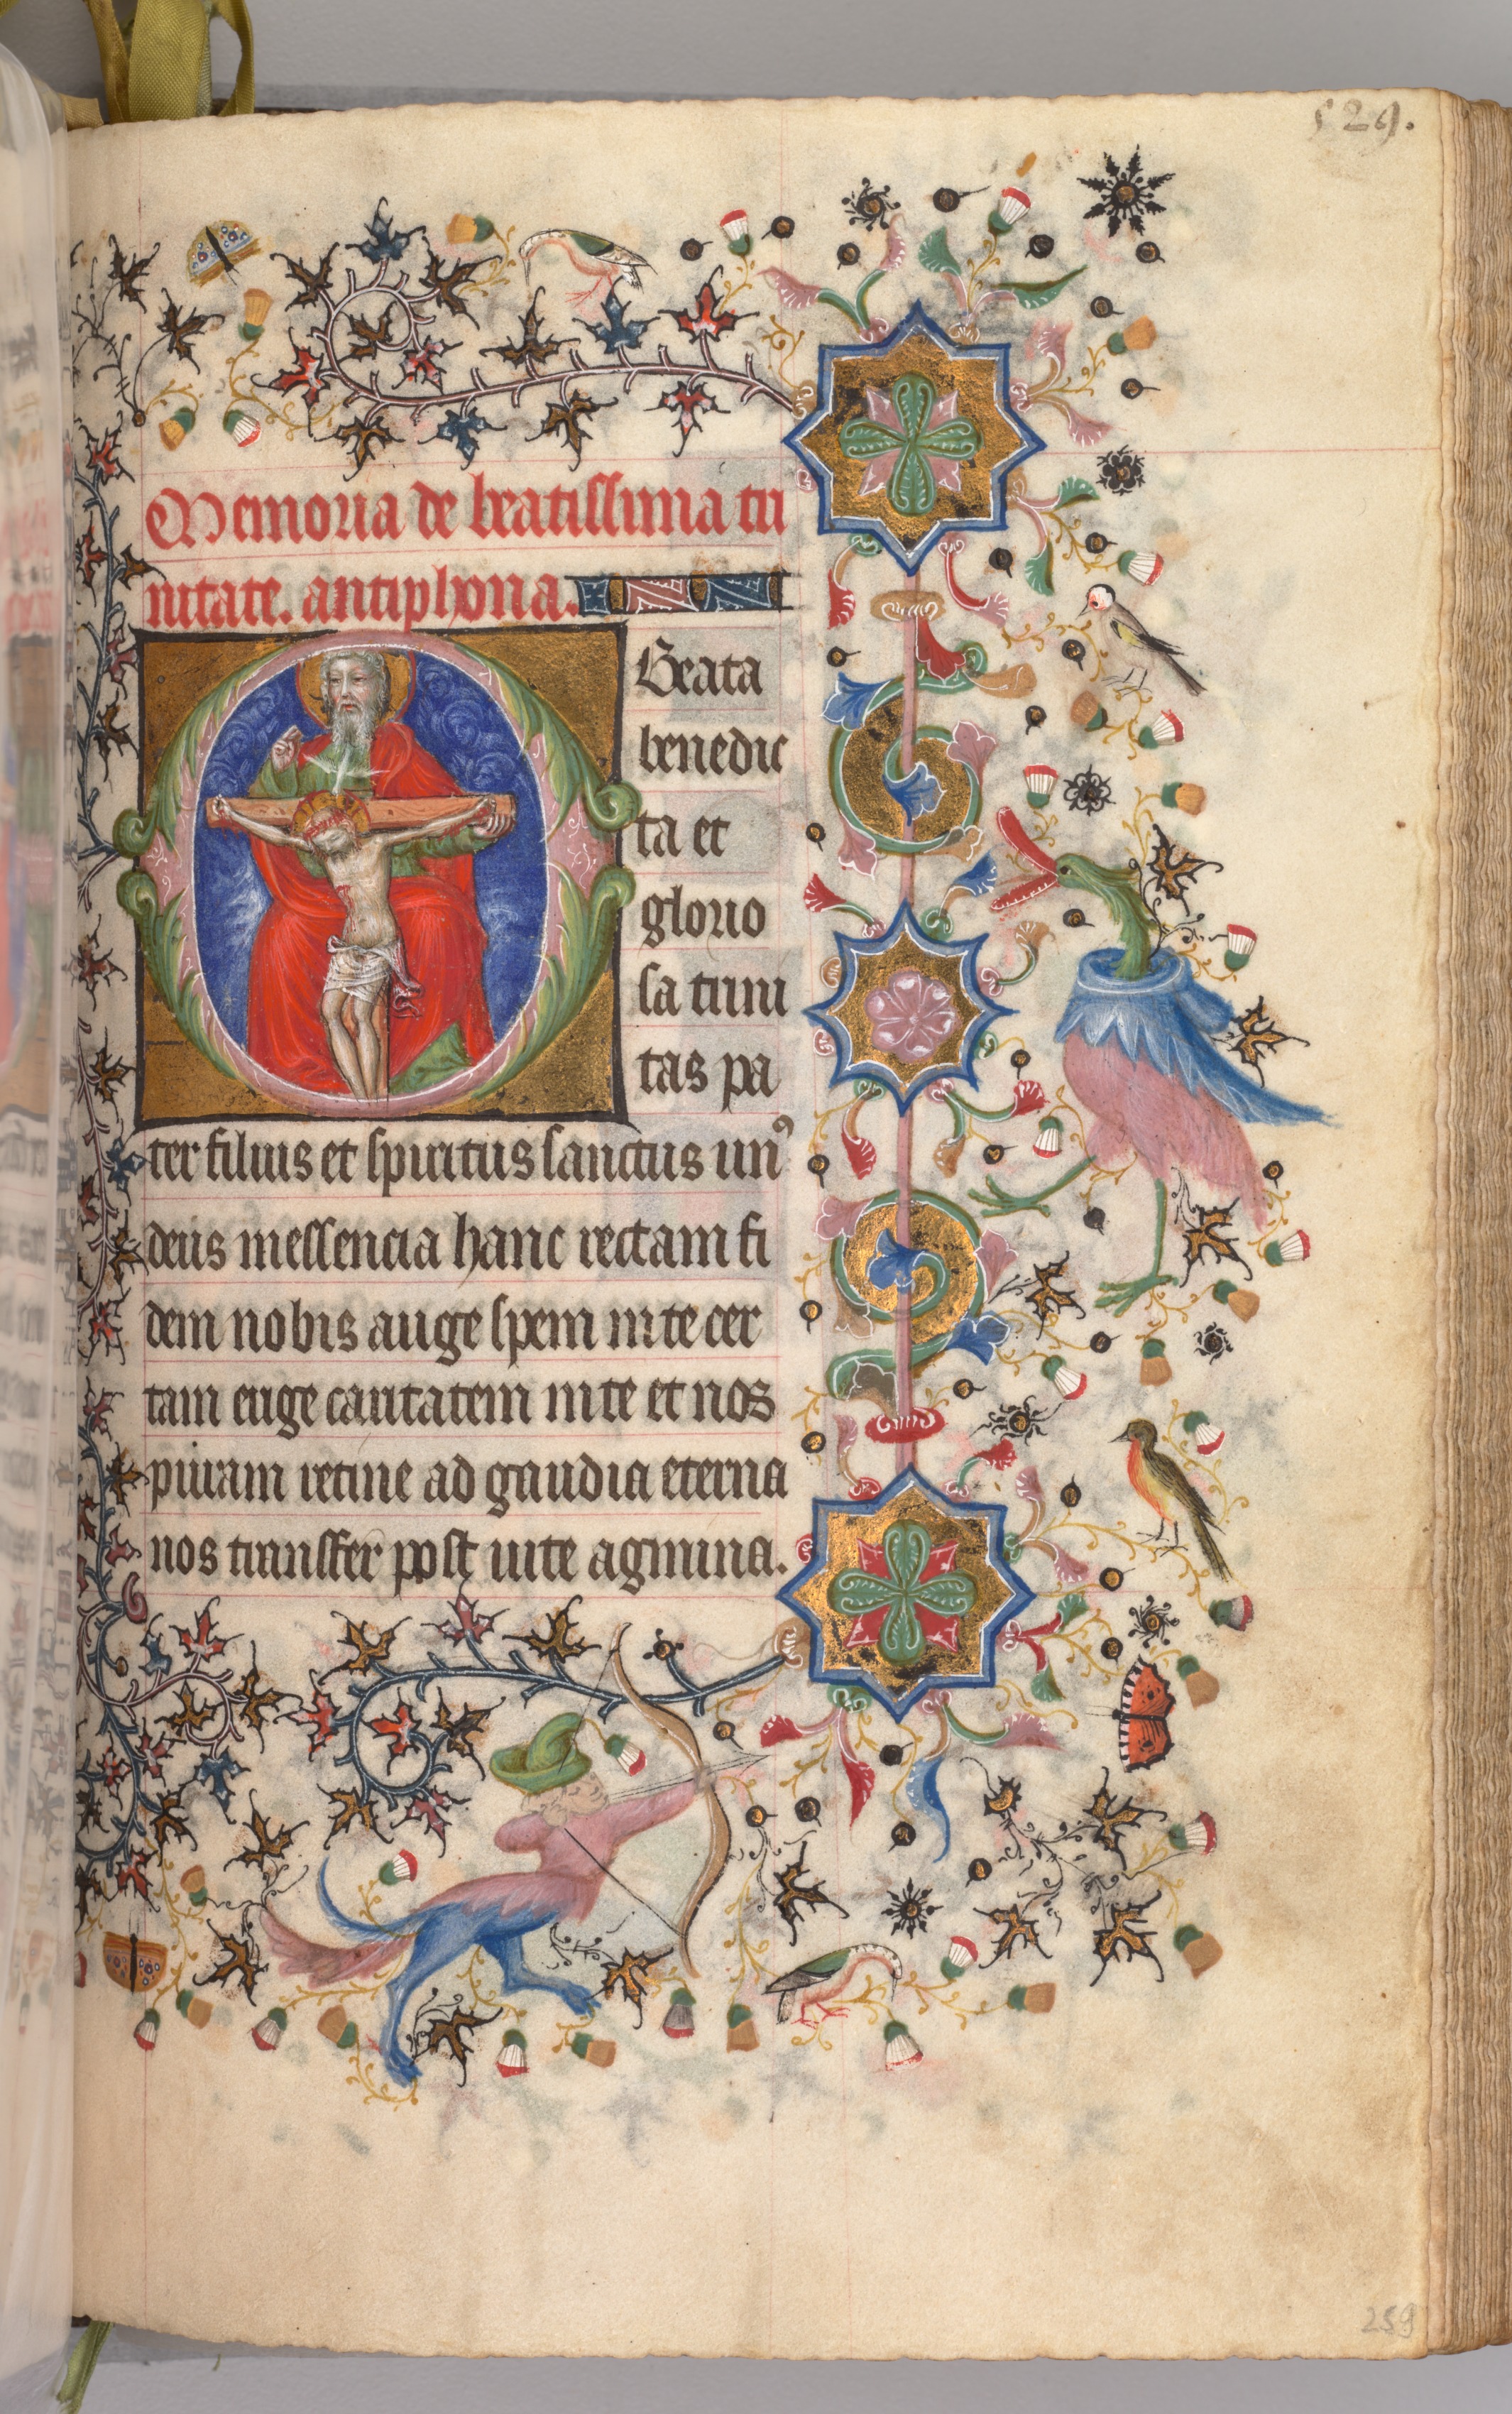 Hours of Charles the Noble, King of Navarre (1361-1425): fol. 259r, The Trinity